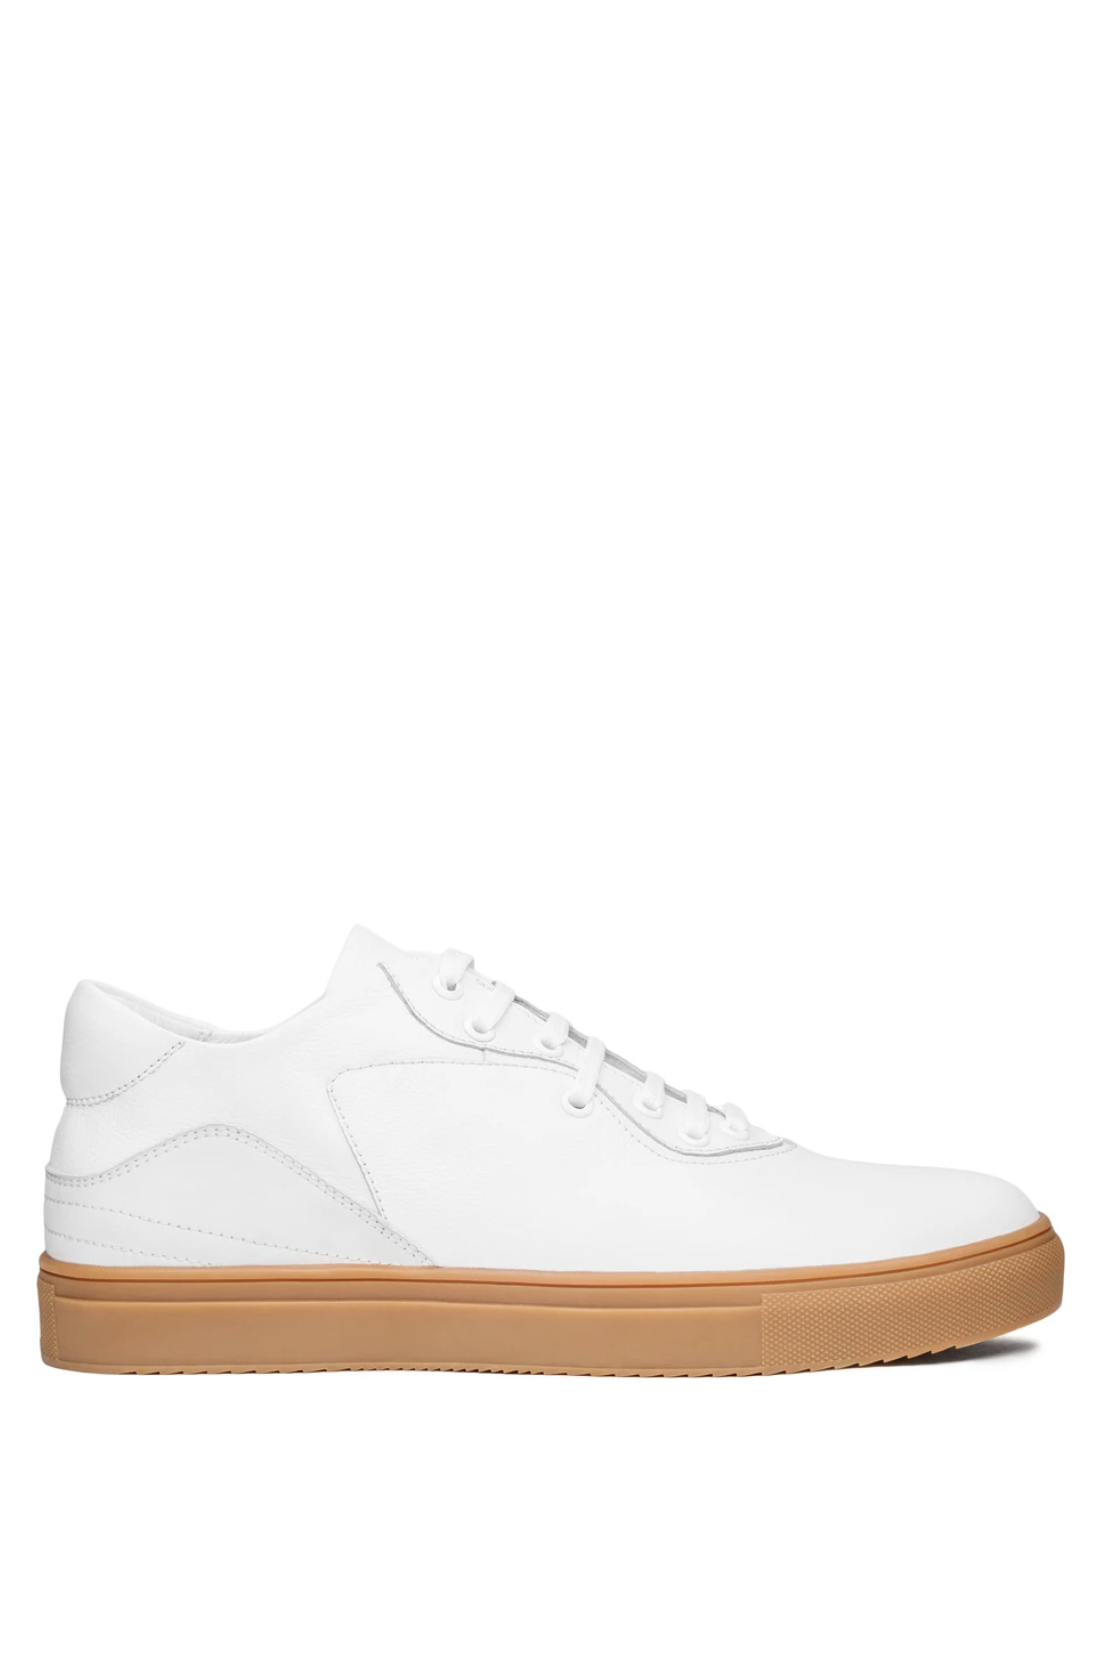 cool white shoes 219